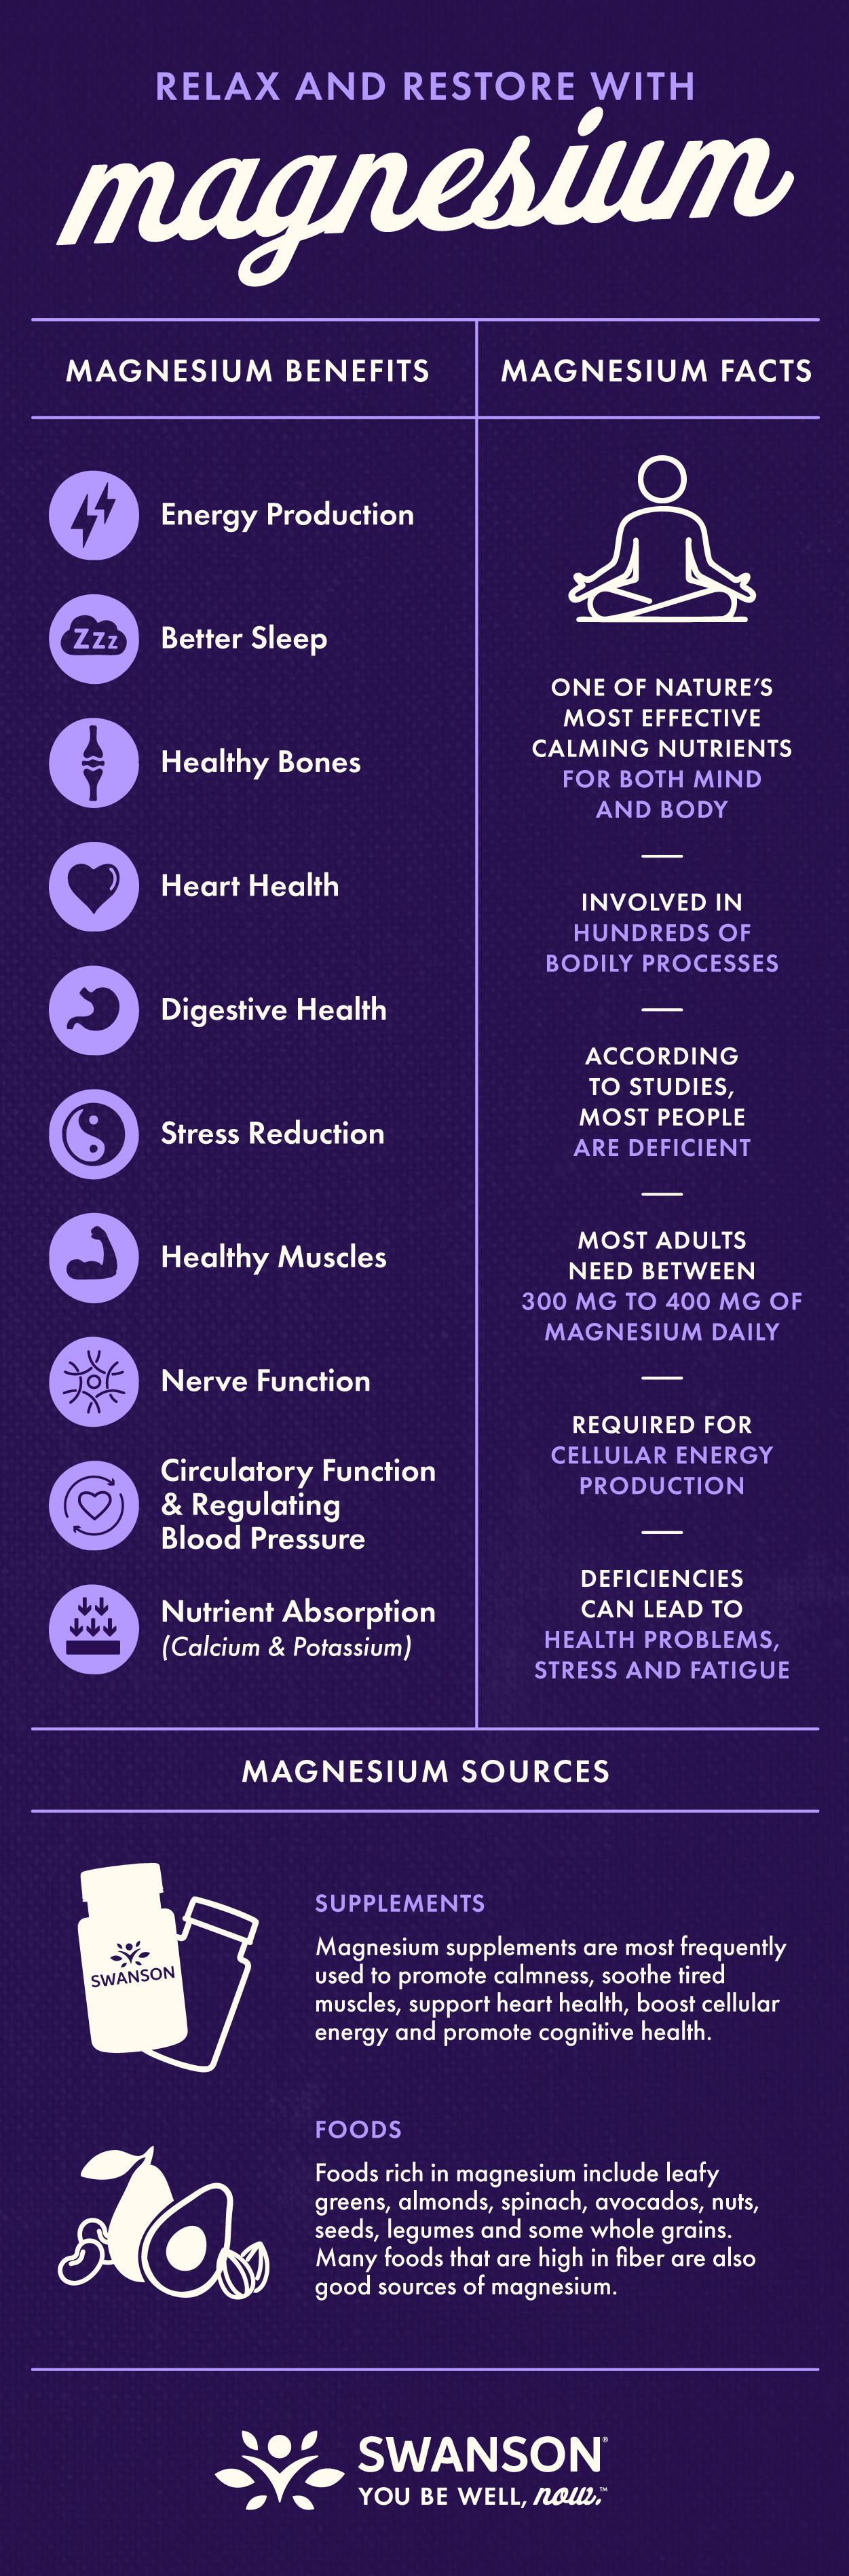 Magnesium Benefits & Uses Infographic by Swanson Health